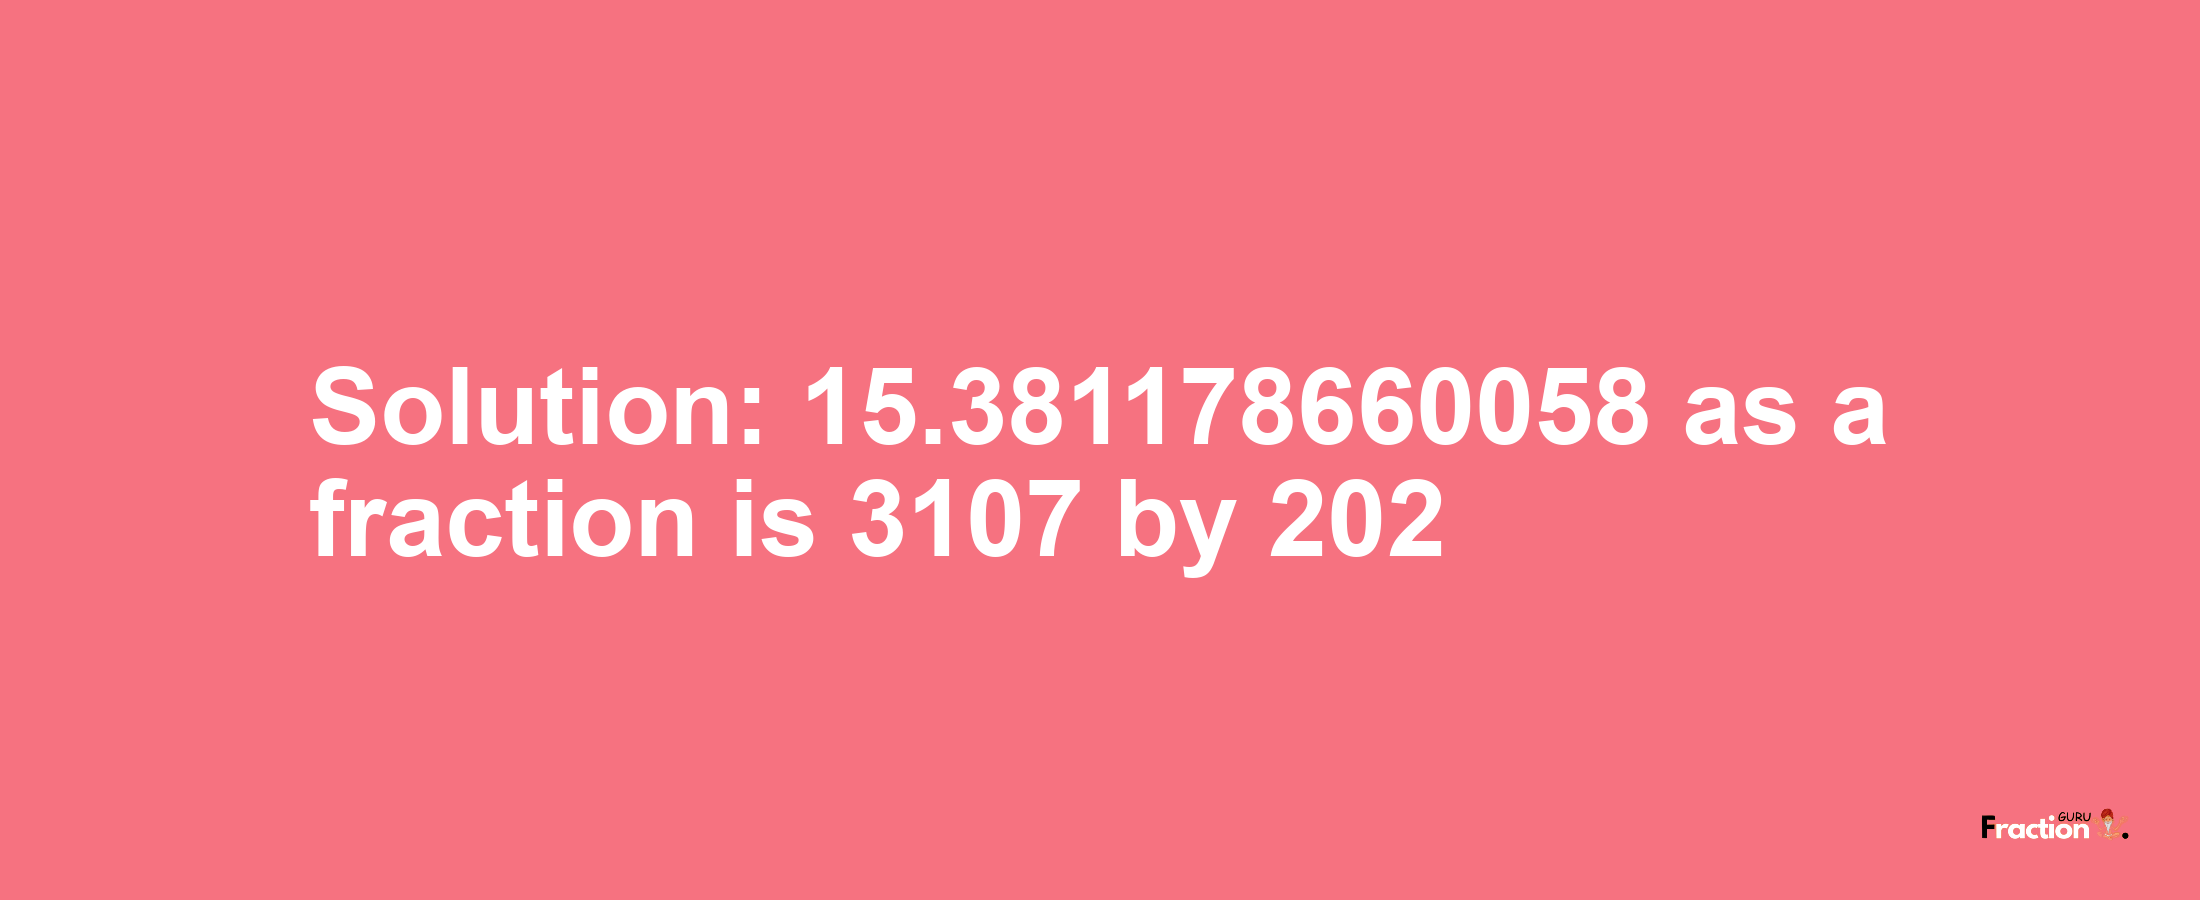 Solution:15.381178660058 as a fraction is 3107/202